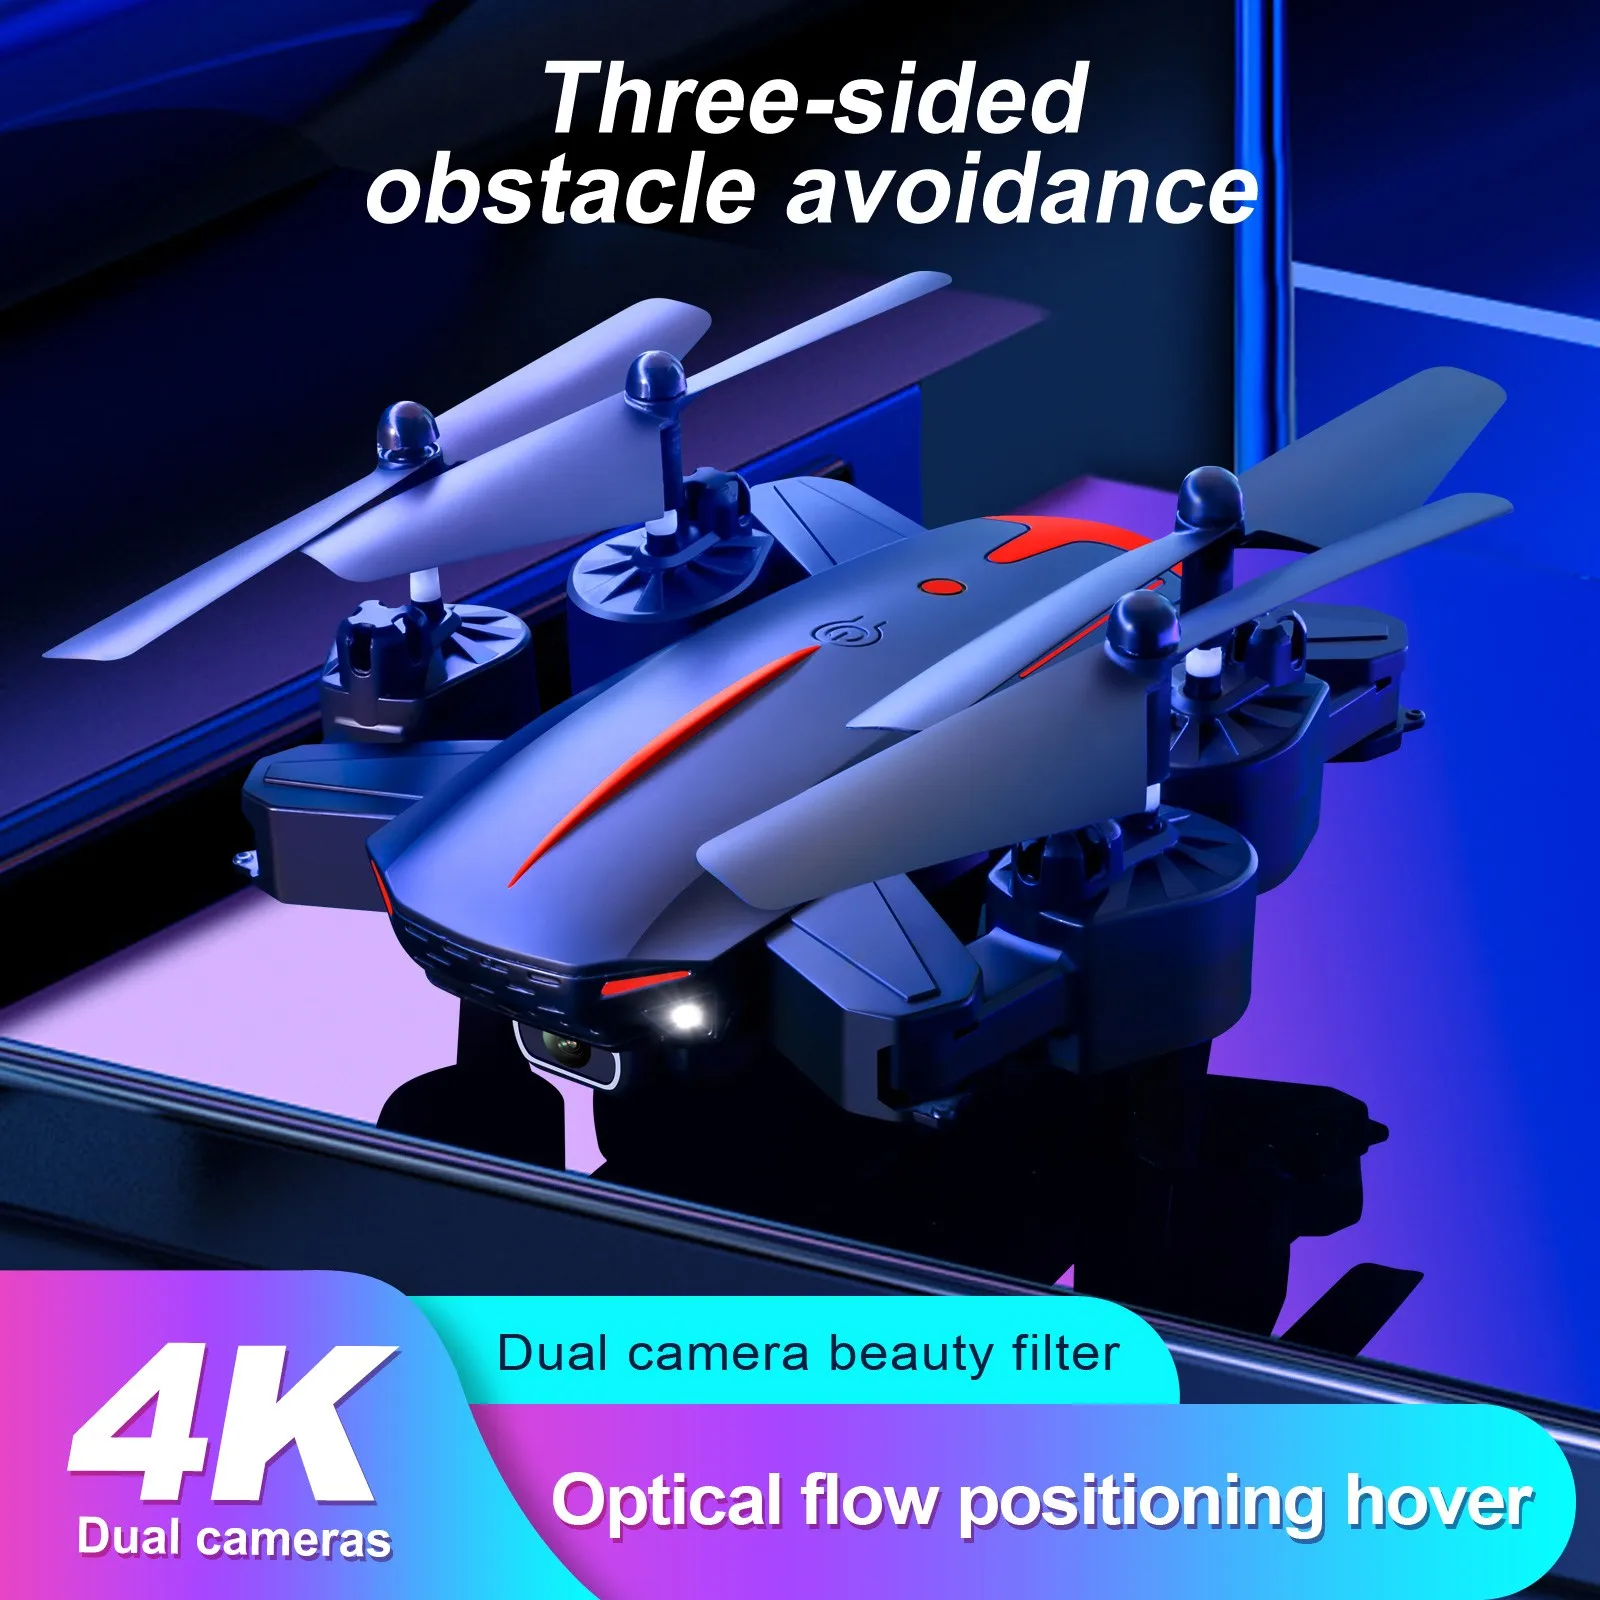 KY605 Pro Drone With 4K Dual HD Camera Aerial Photography Quadcopter Professional Wifi FPV Helicopter Rc Drone Toys Kid Gift quadcopter remote